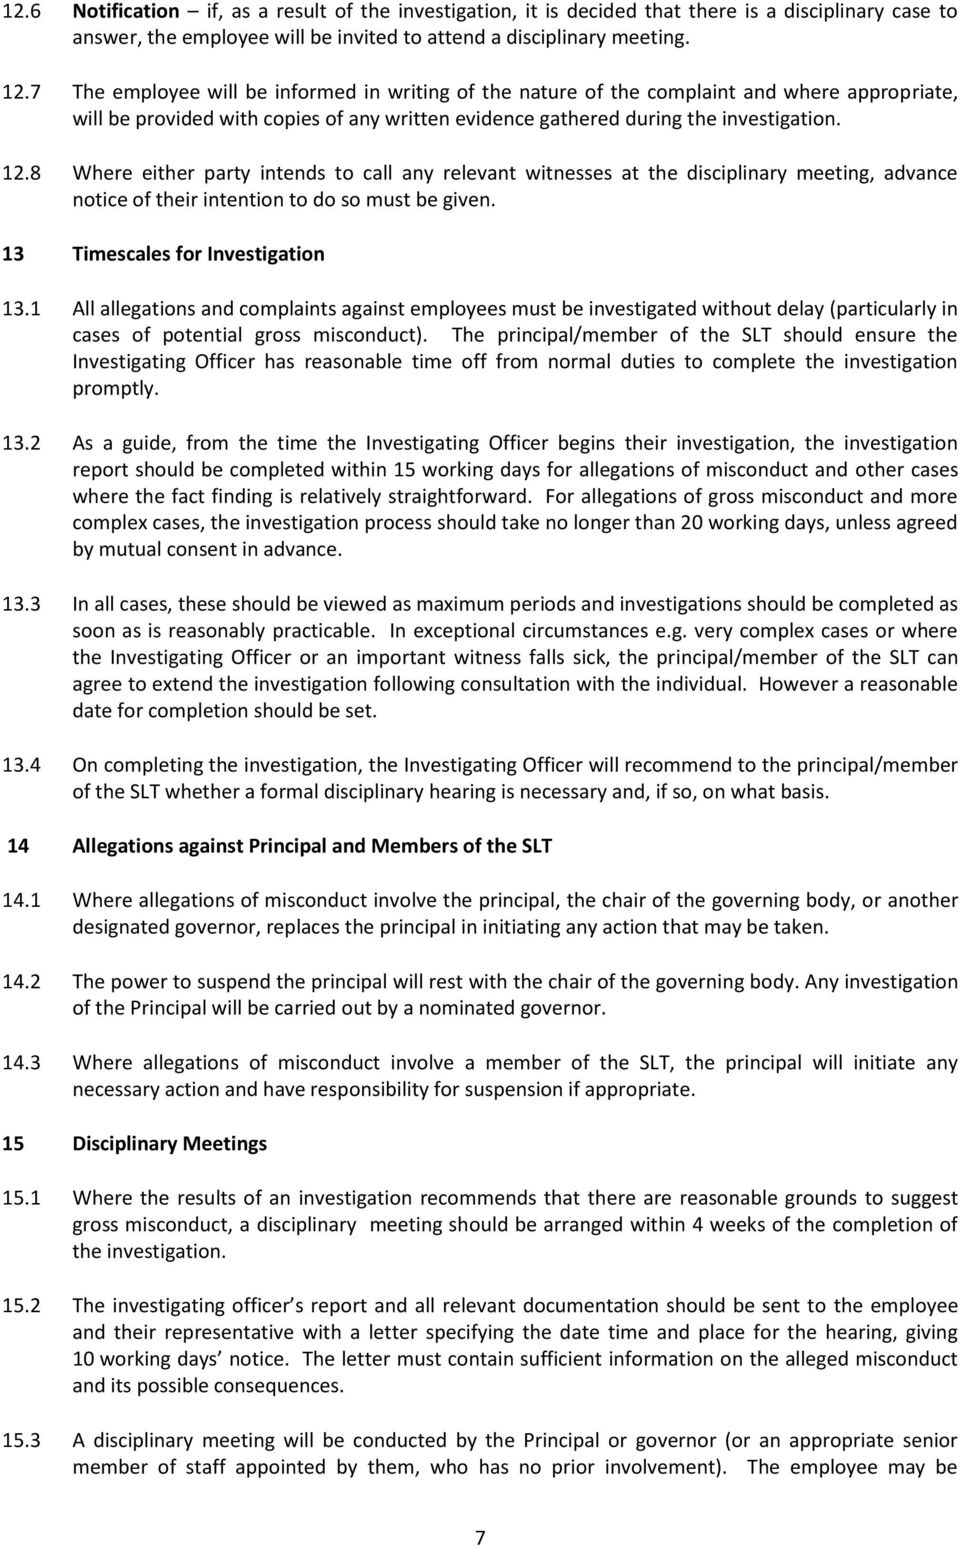 8 Where either party intends to call any relevant witnesses at the disciplinary meeting, advance notice of their intention to do so must be given. 13 Timescales for Investigation 13.